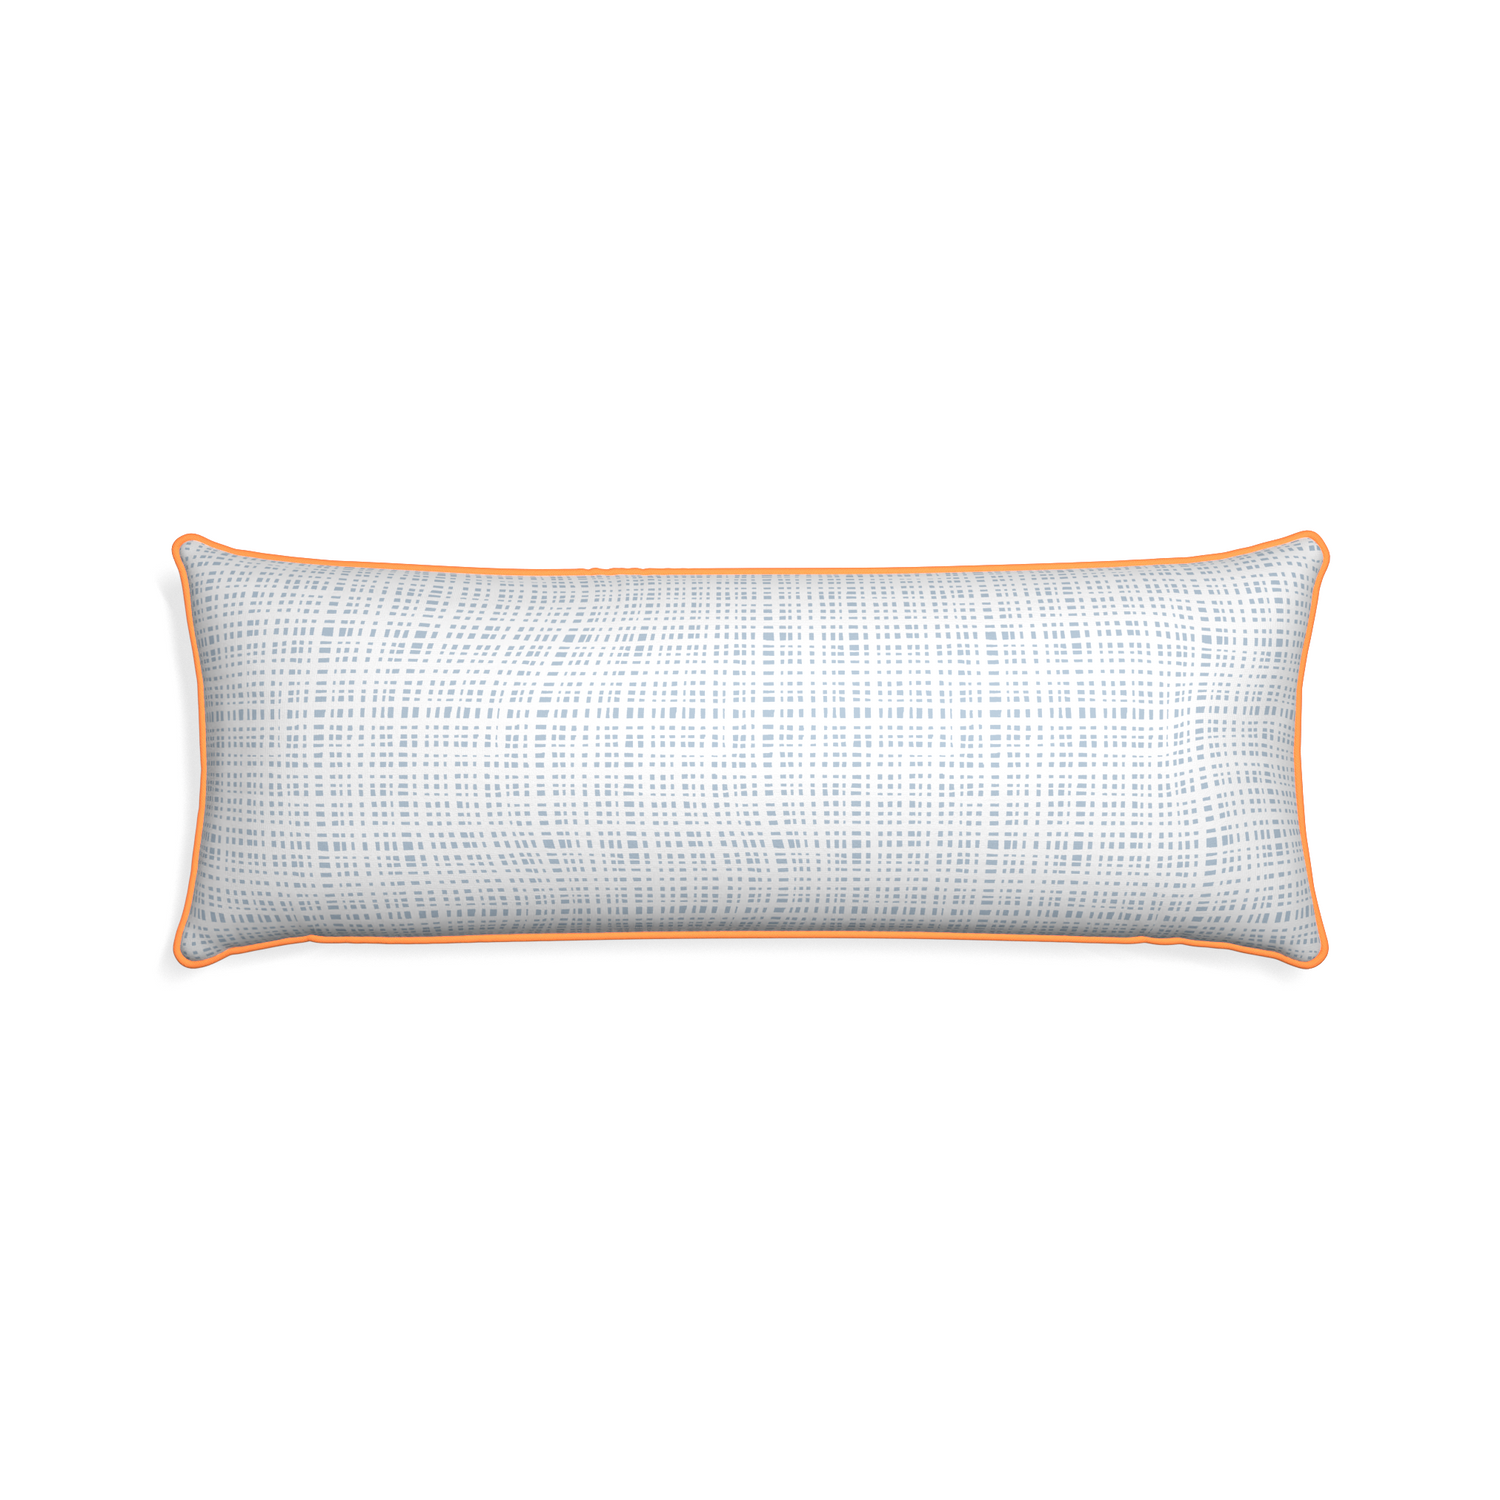 Xl-lumbar ginger sky custom plaid sky bluepillow with clementine piping on white background